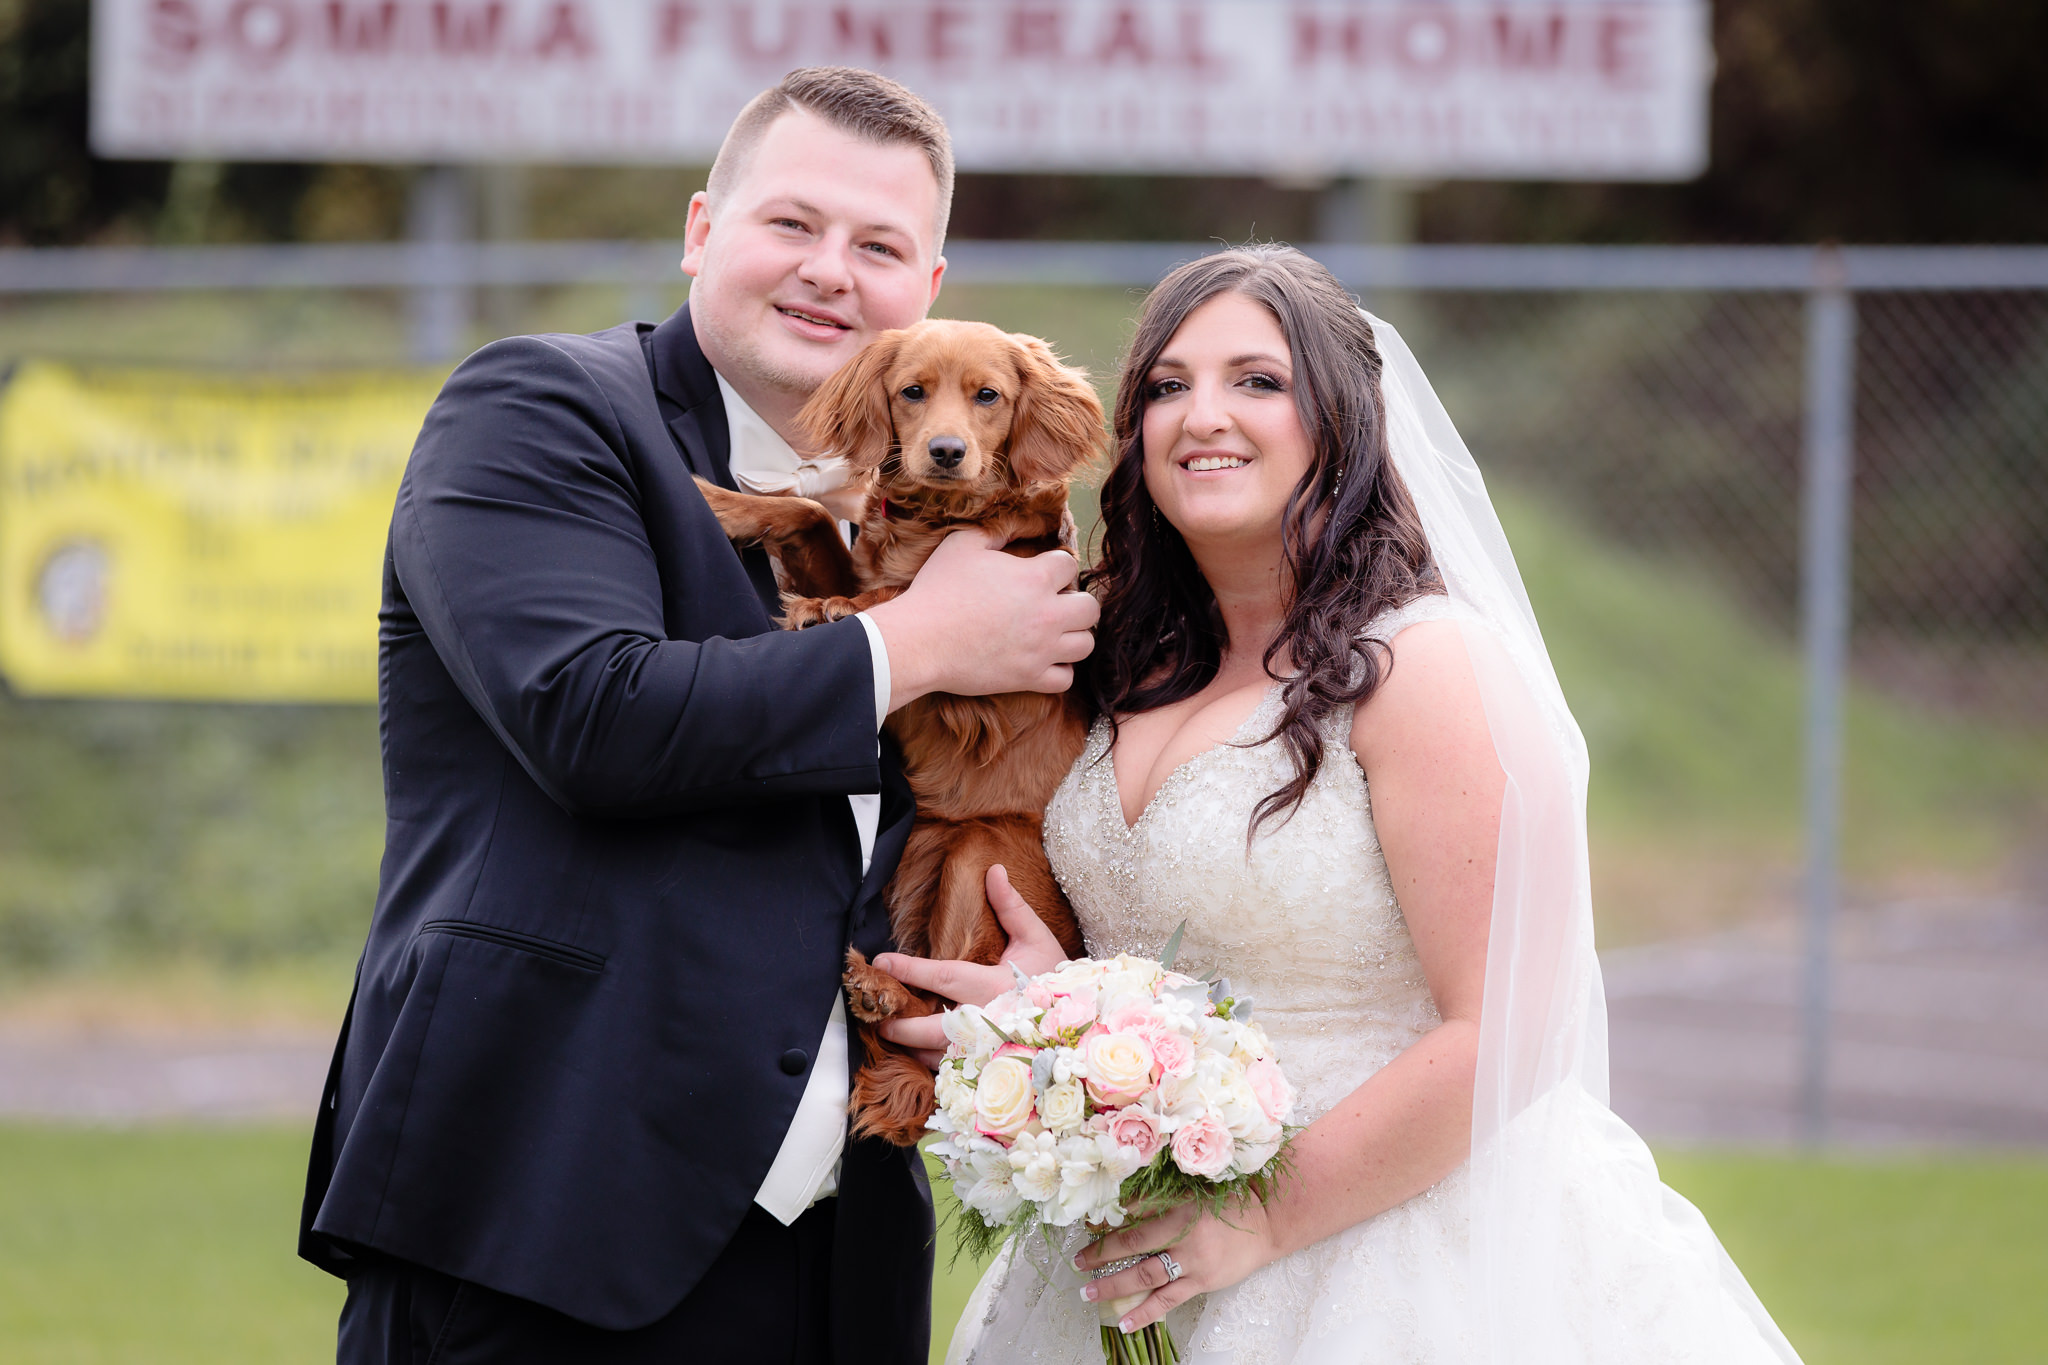 Bride and groom with their dog at the Robinson Township Girls Softball field